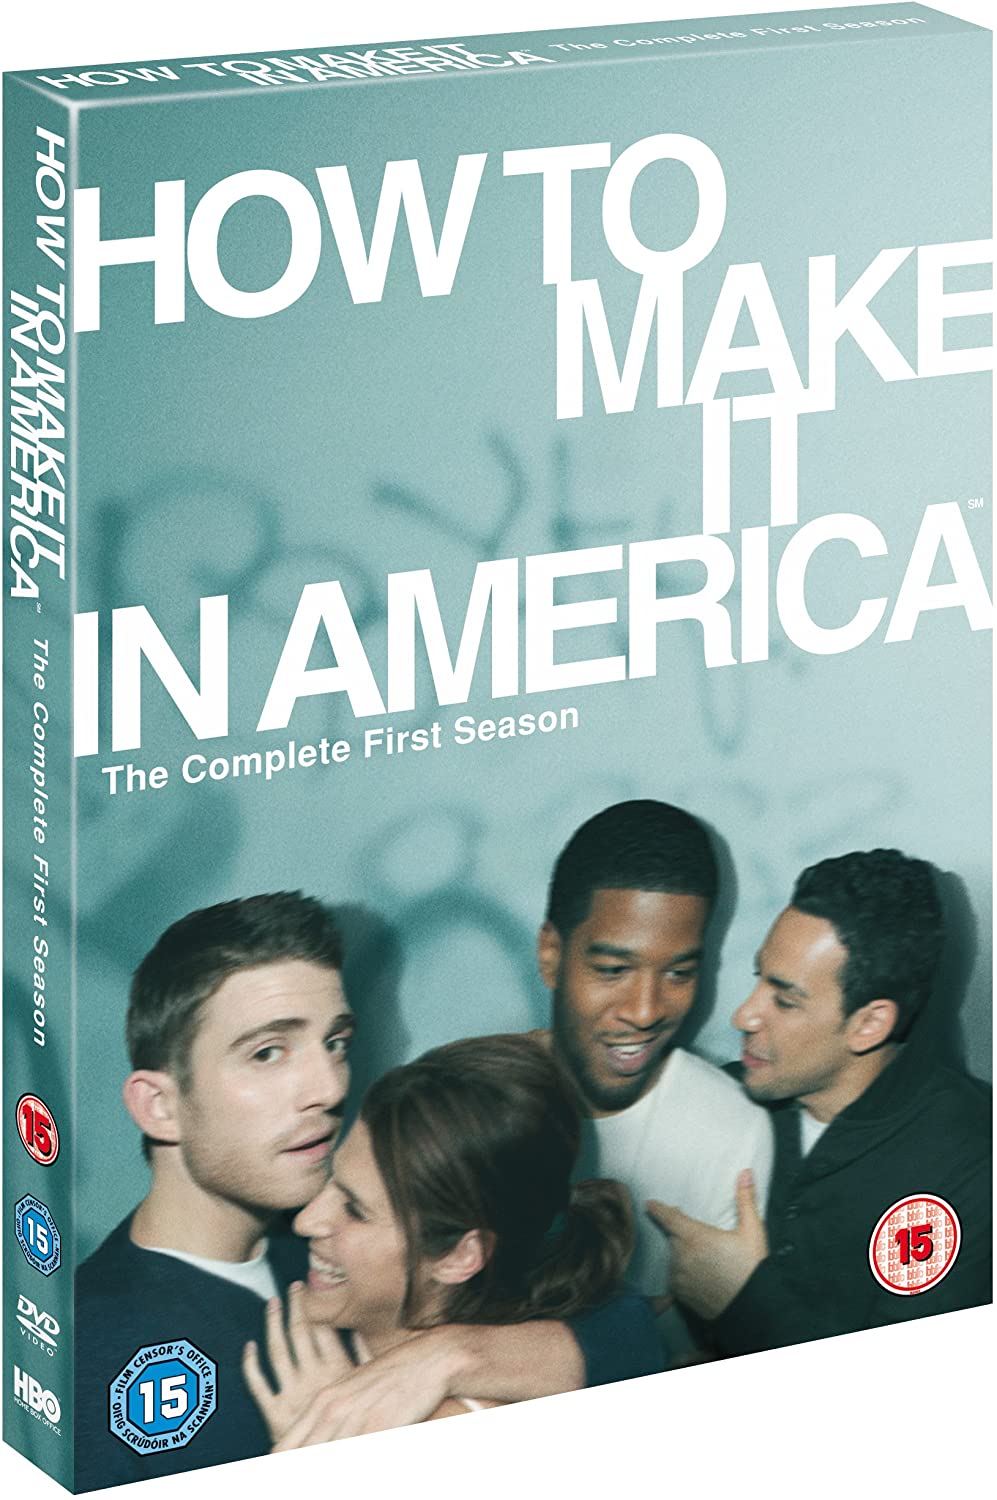 How To Make It In America: Season 1 [2010] [2011] - Comedy [DVD]